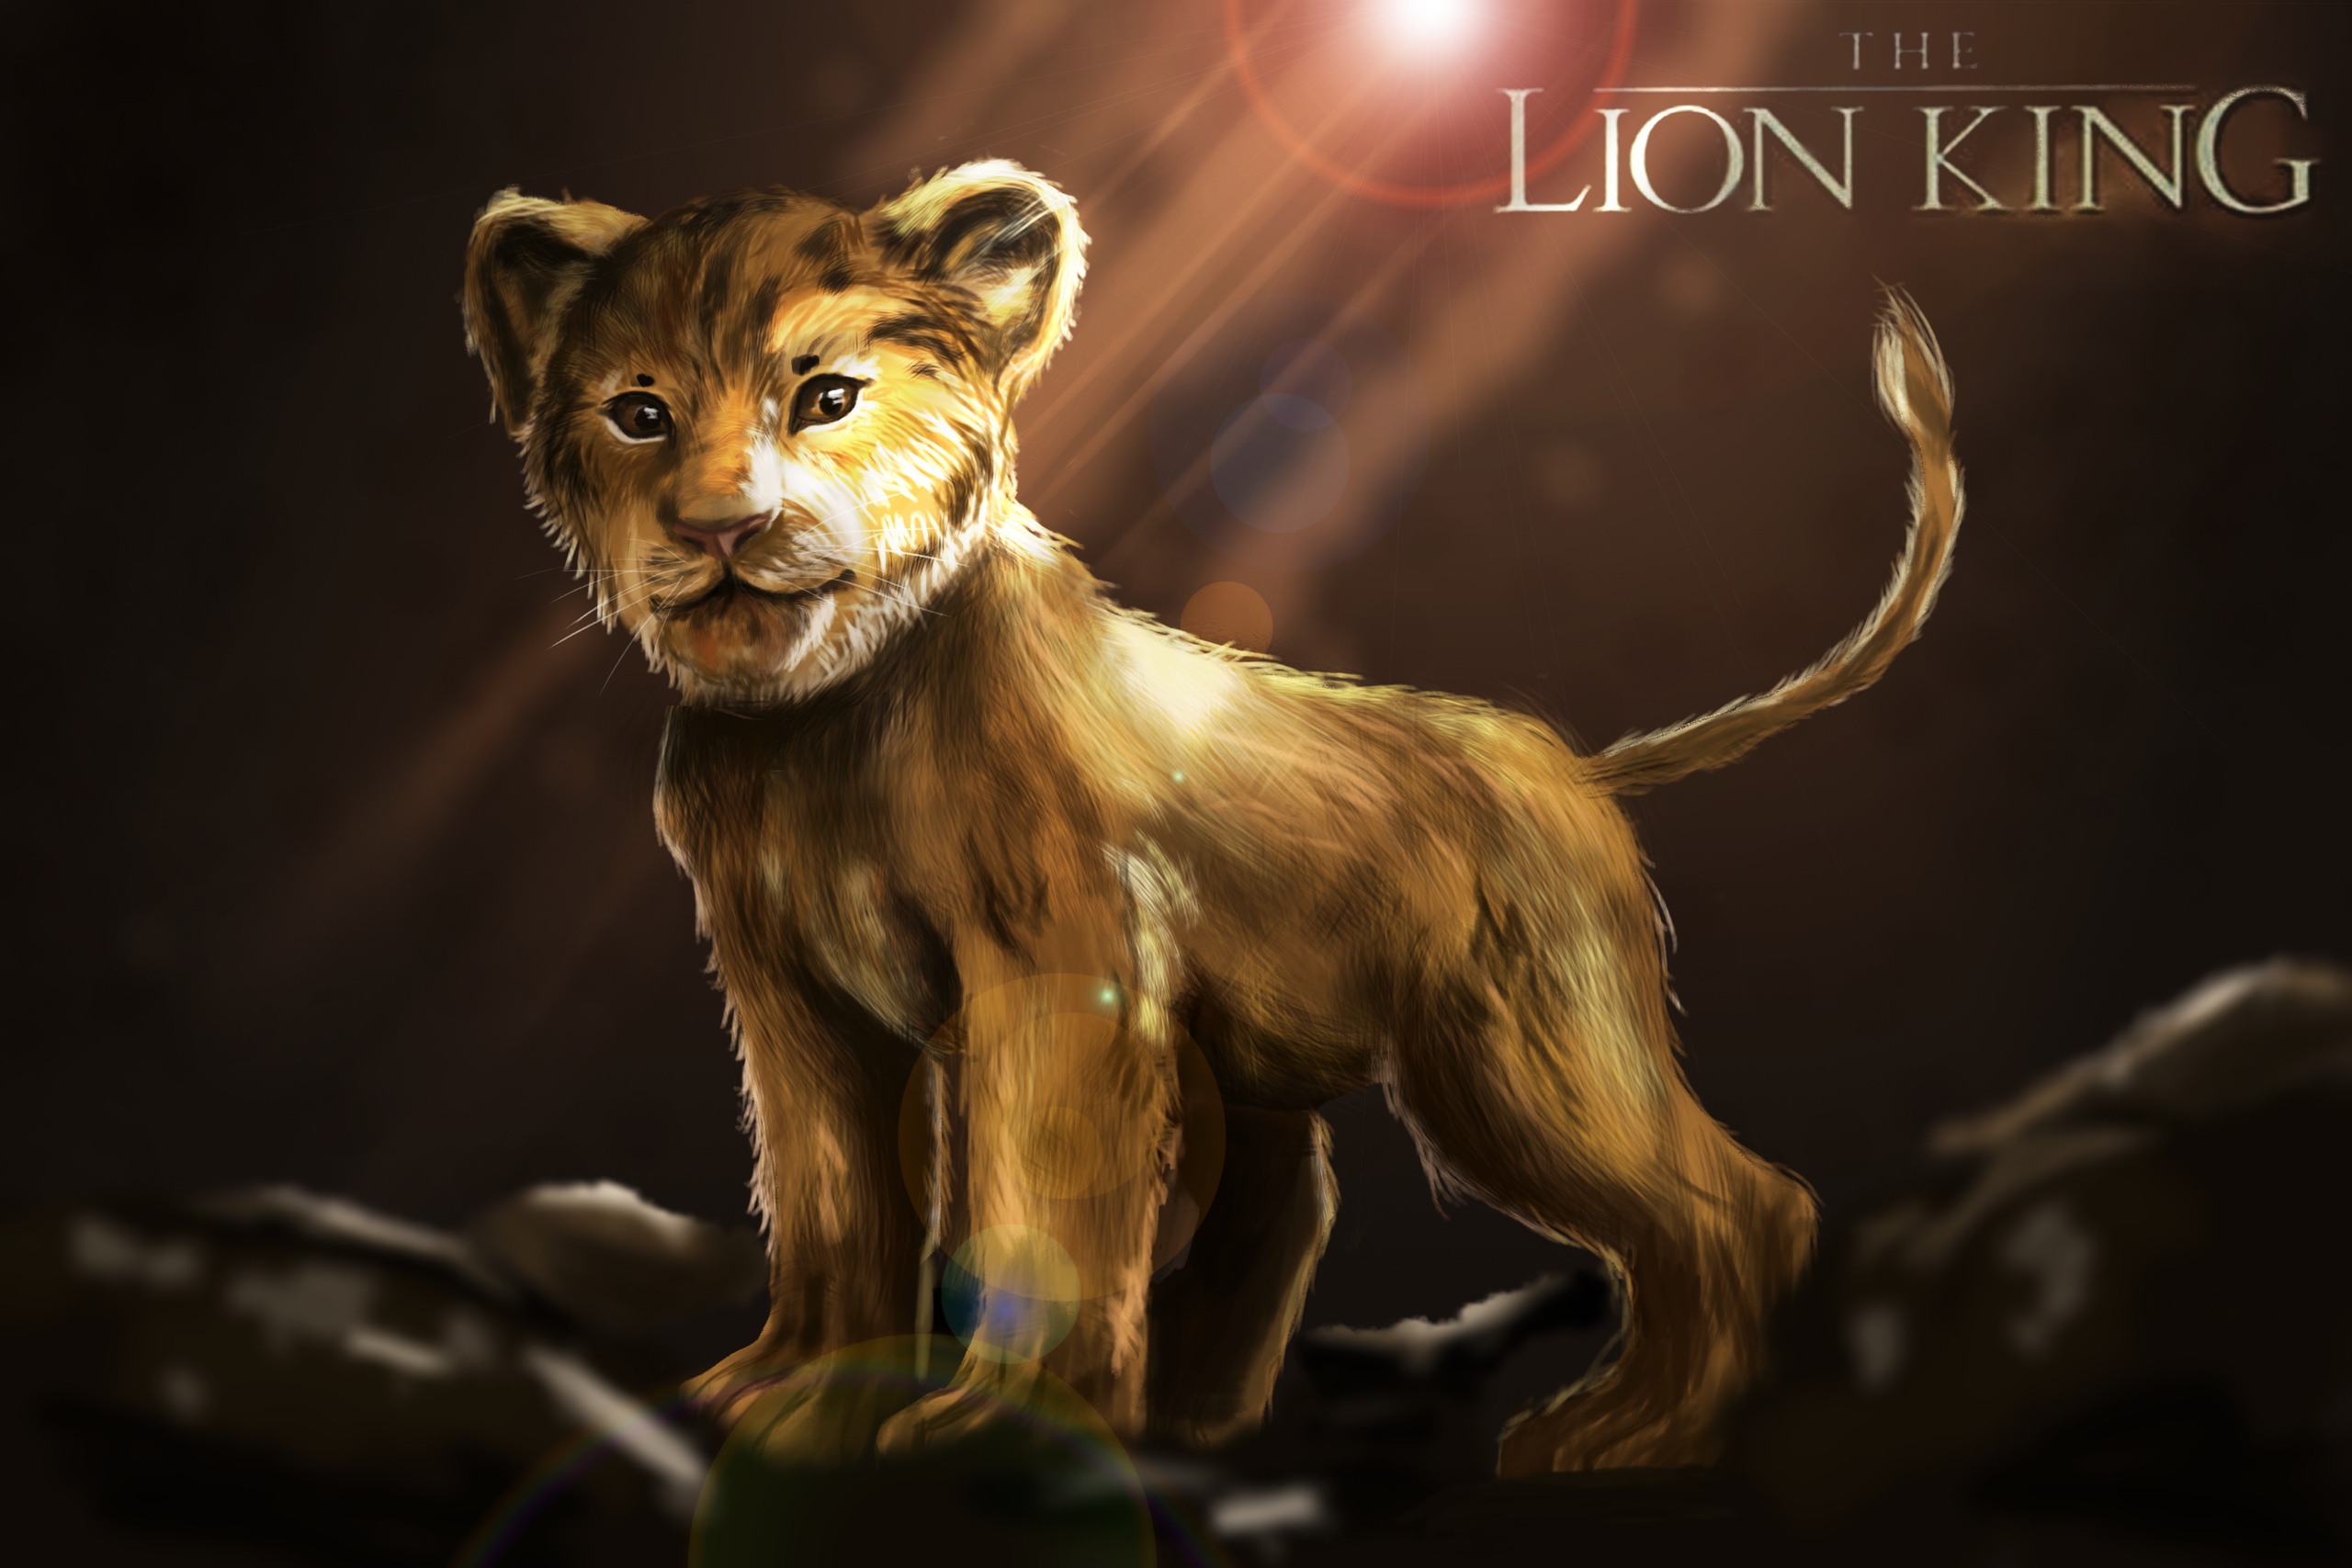 The Lion King Image HD Wallpaper And